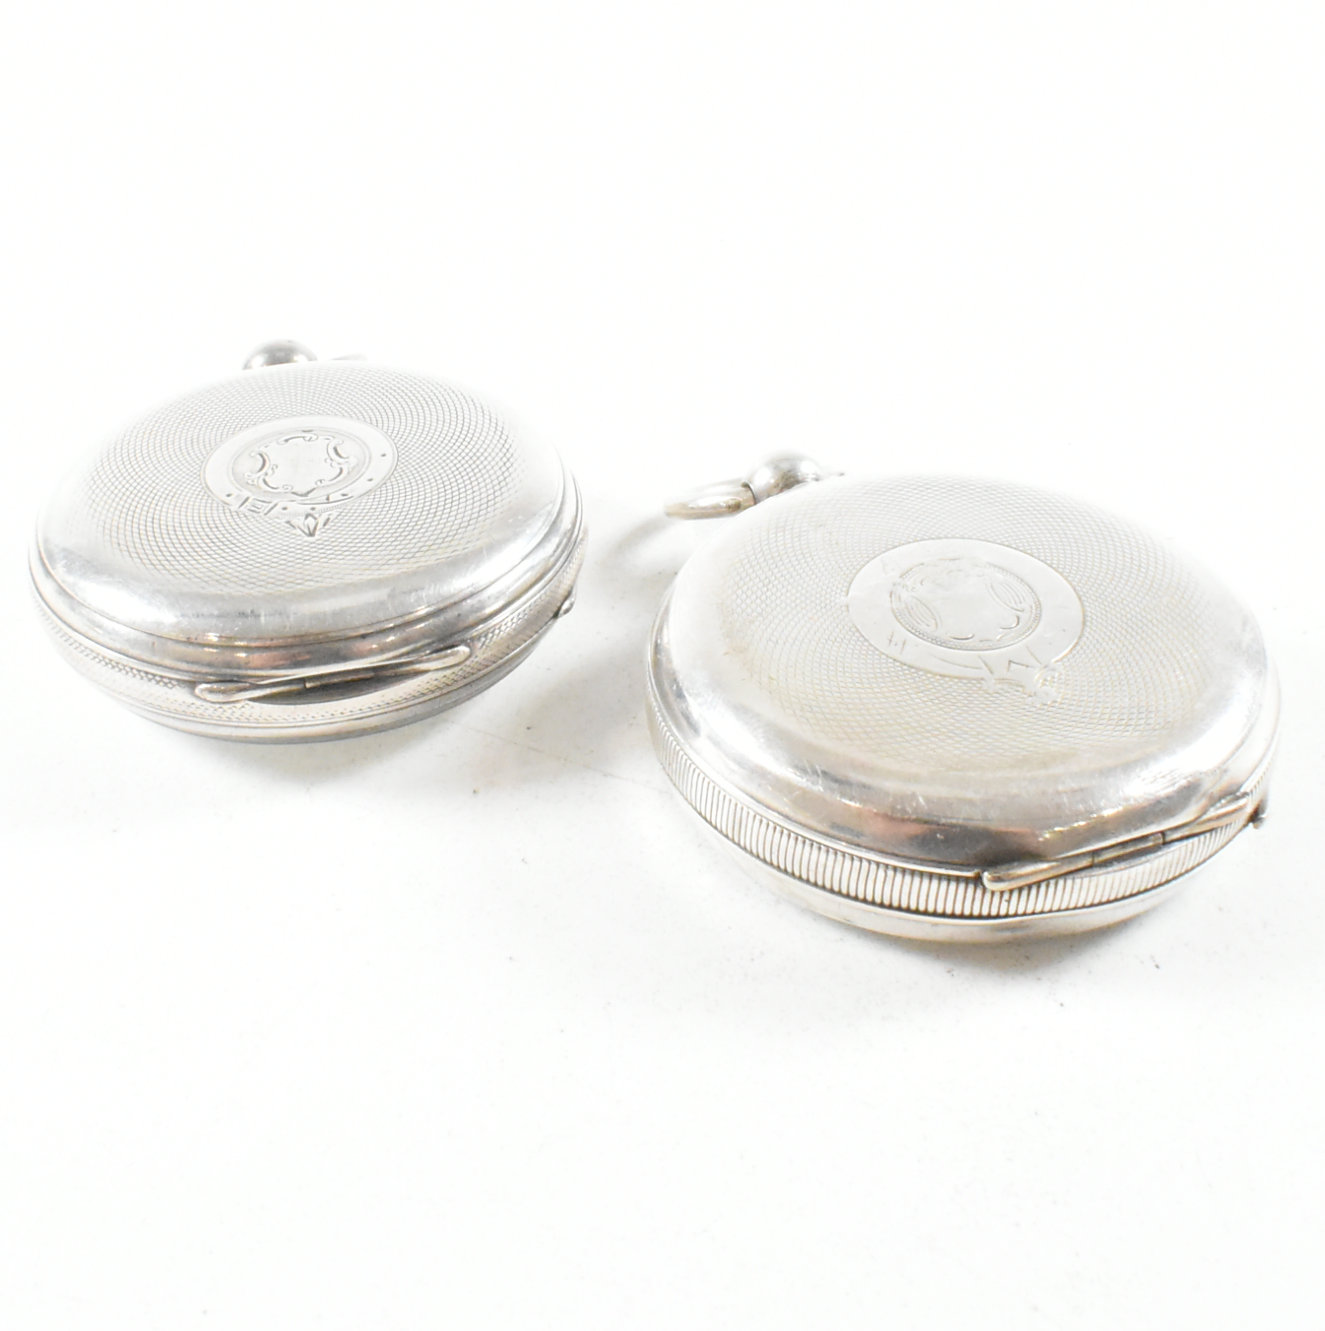 TWO ANTIQUE SILVER CASED POCKET WATCHES - Image 8 of 9